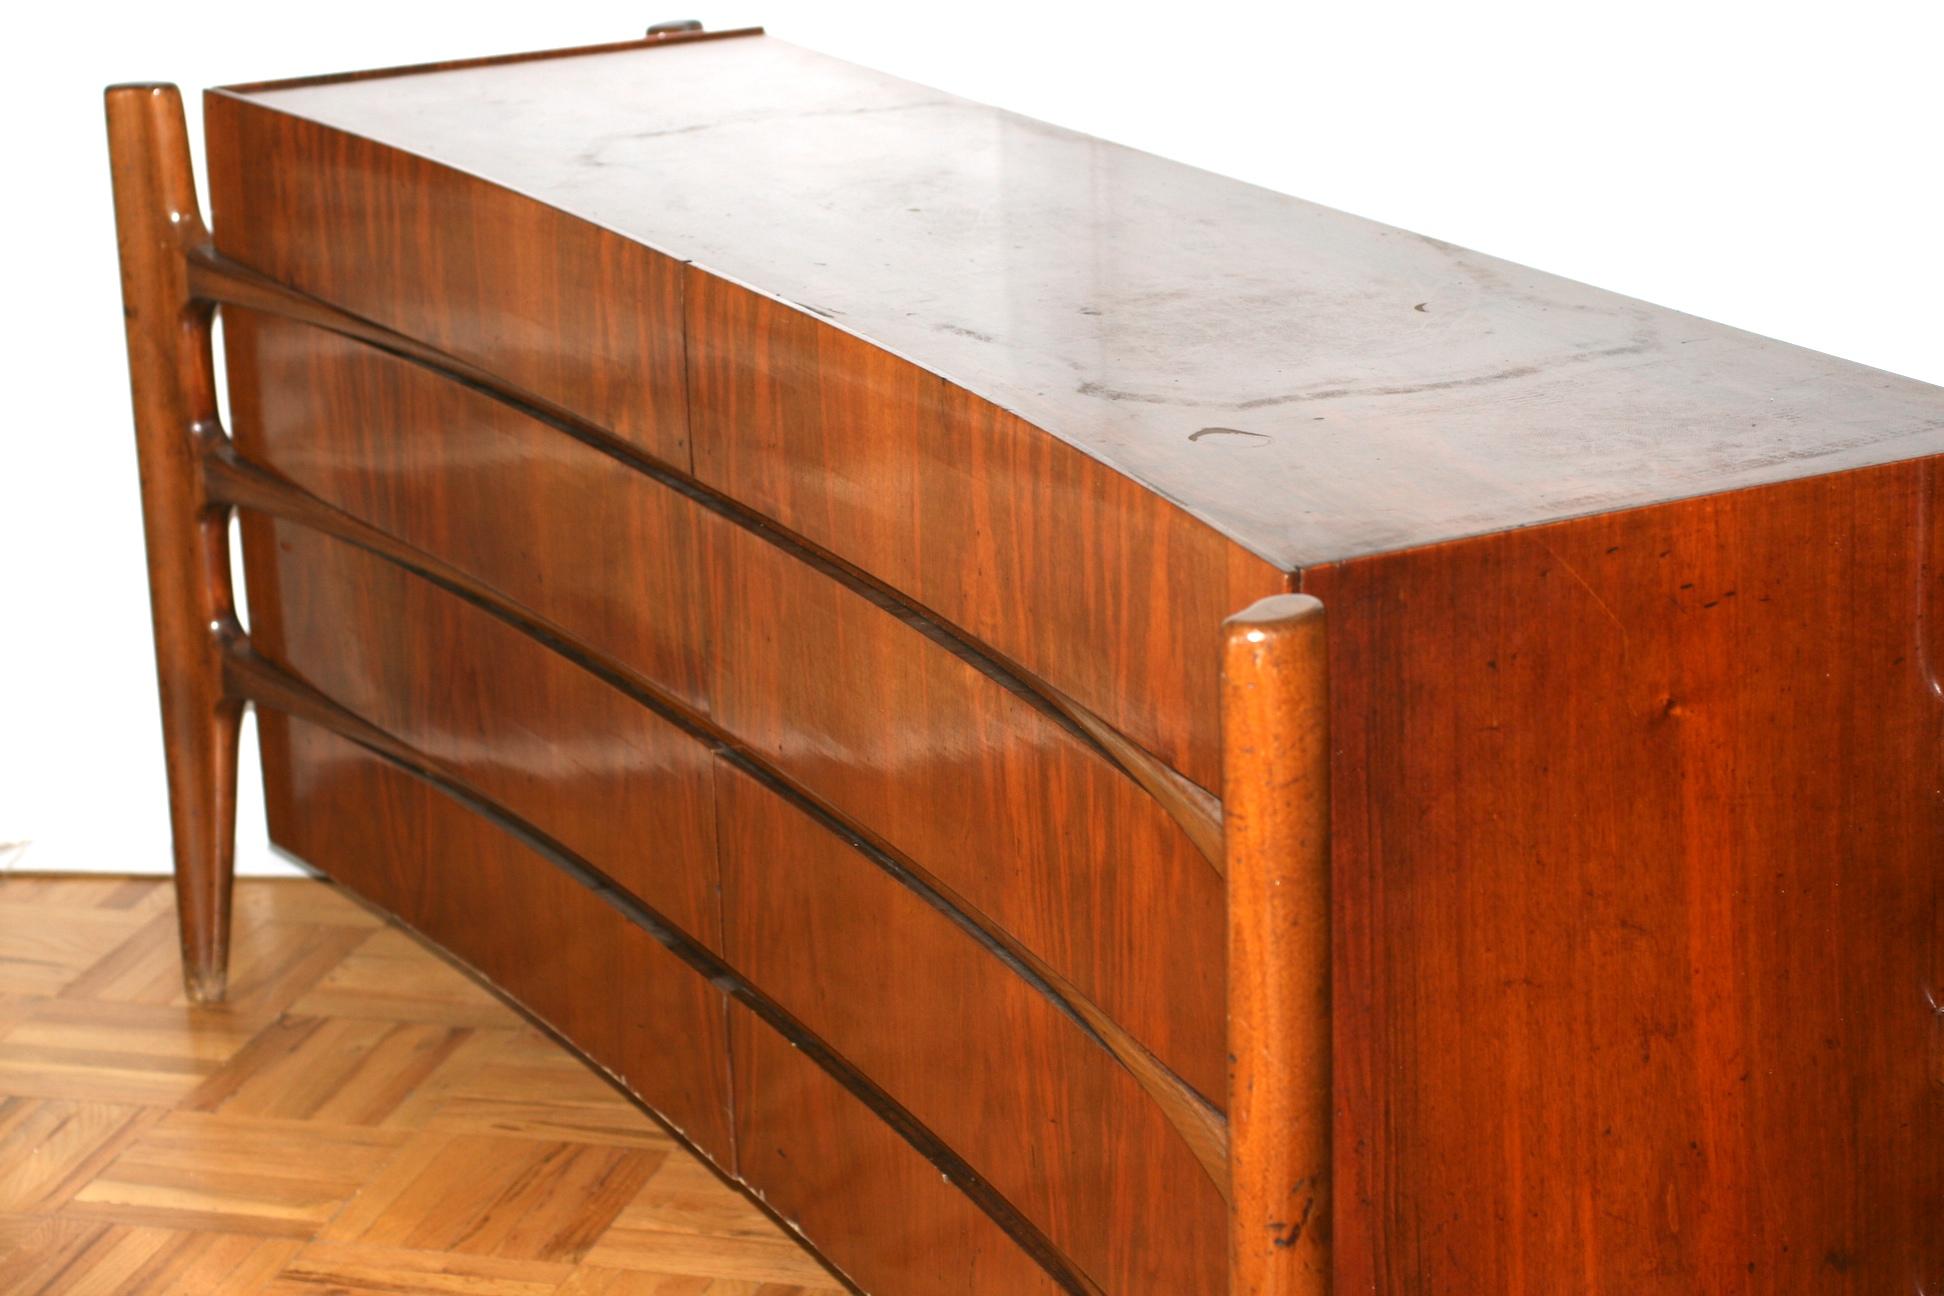 Wonderful curved and sculptural dresser or credenza from the 1950s Sweden with an exposed biomorphic frame of exquisitely hand-sculpted solid walnut intersects which appear as spider like legs suspending an eight-drawer dresser cabinet with a curved